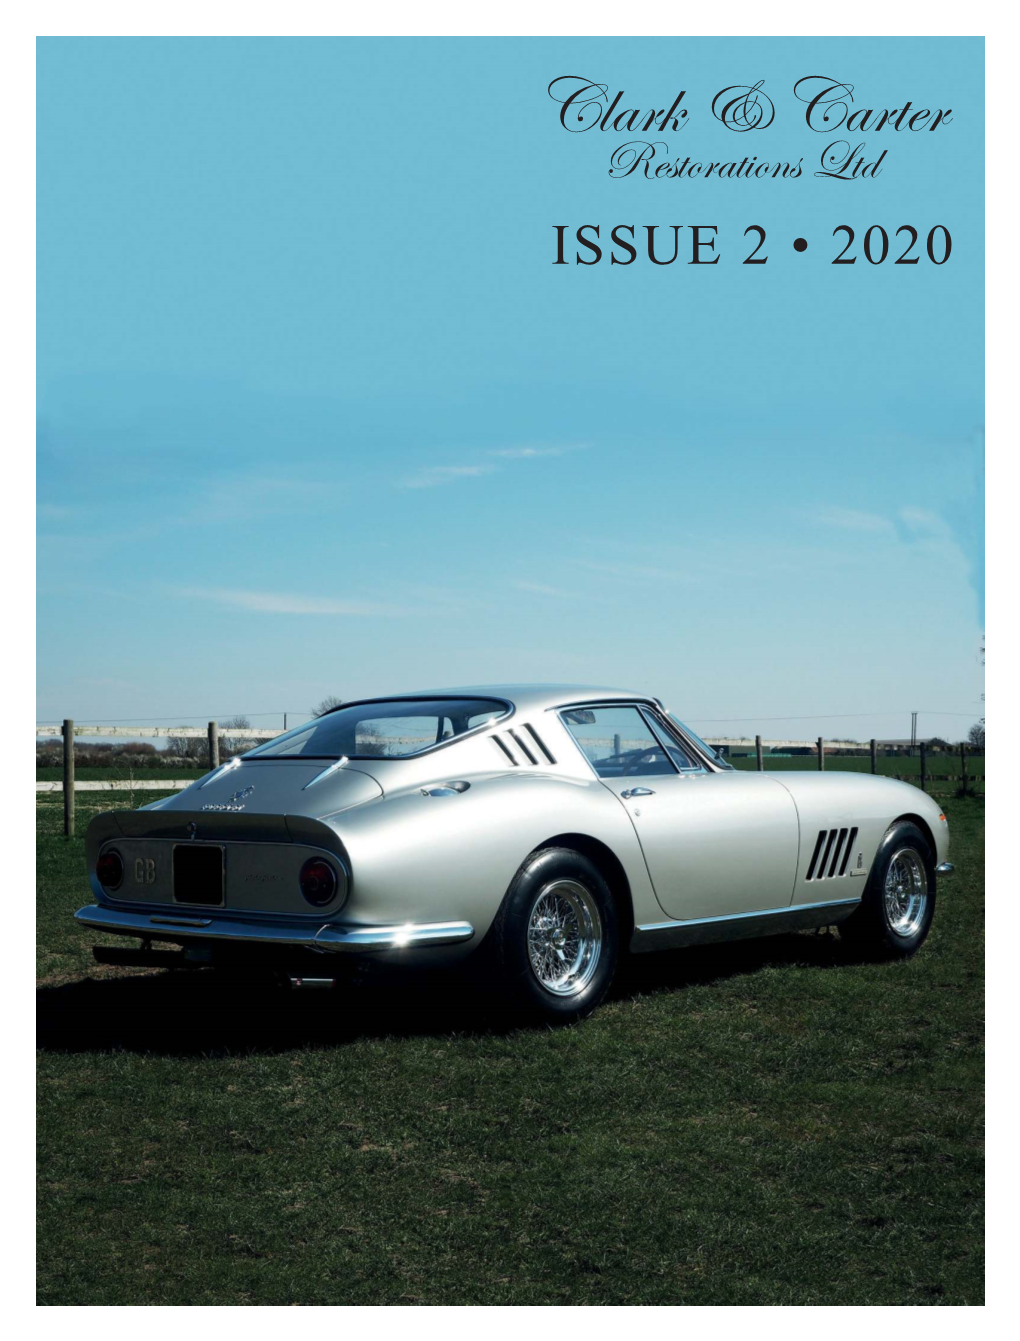 Issue 2 • 2020 in This Issue